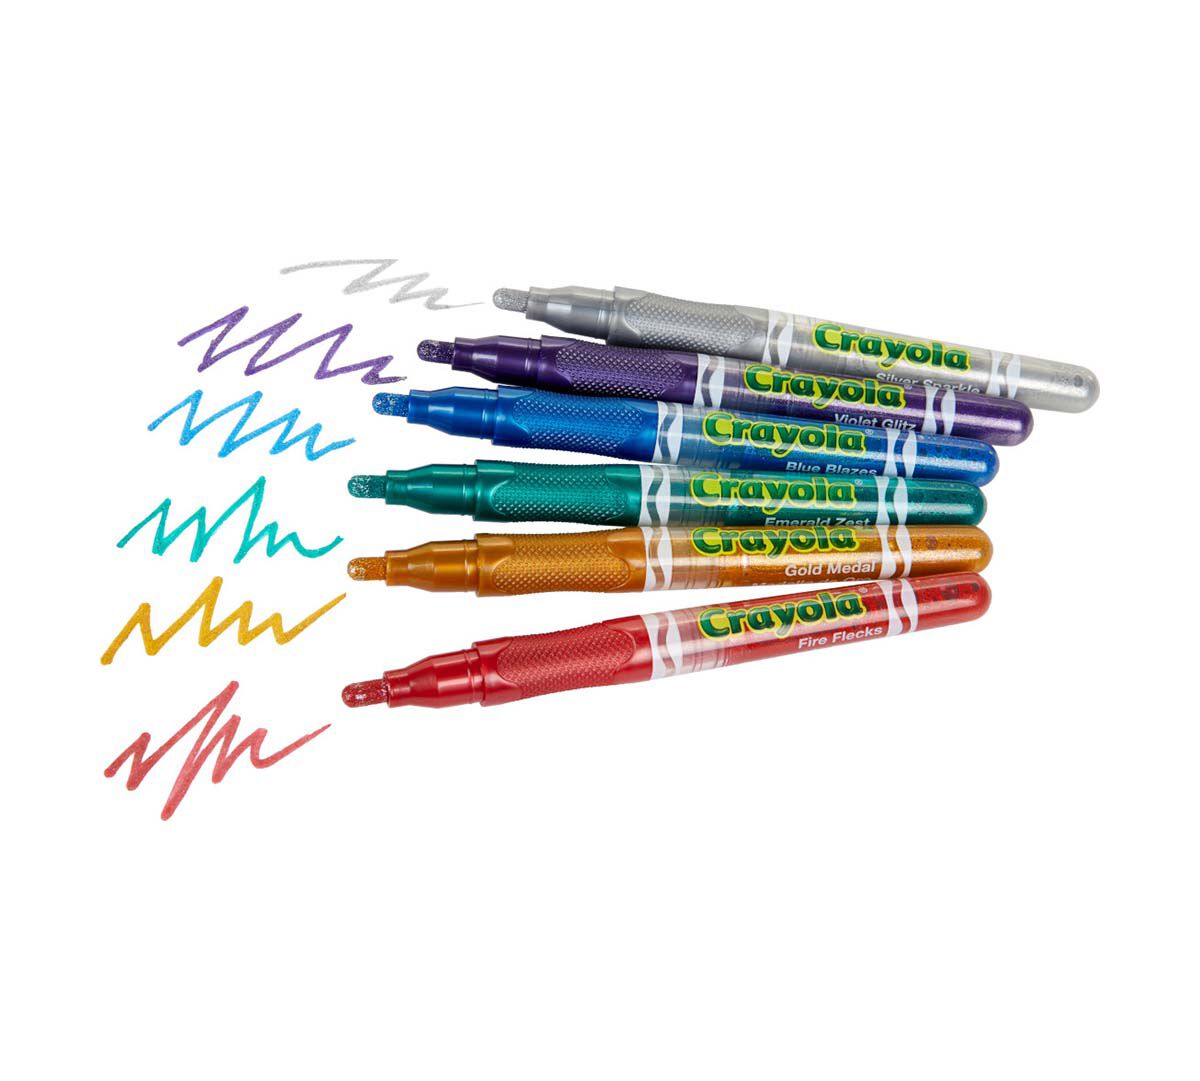 Crayola Glitter Markers 6 Count 